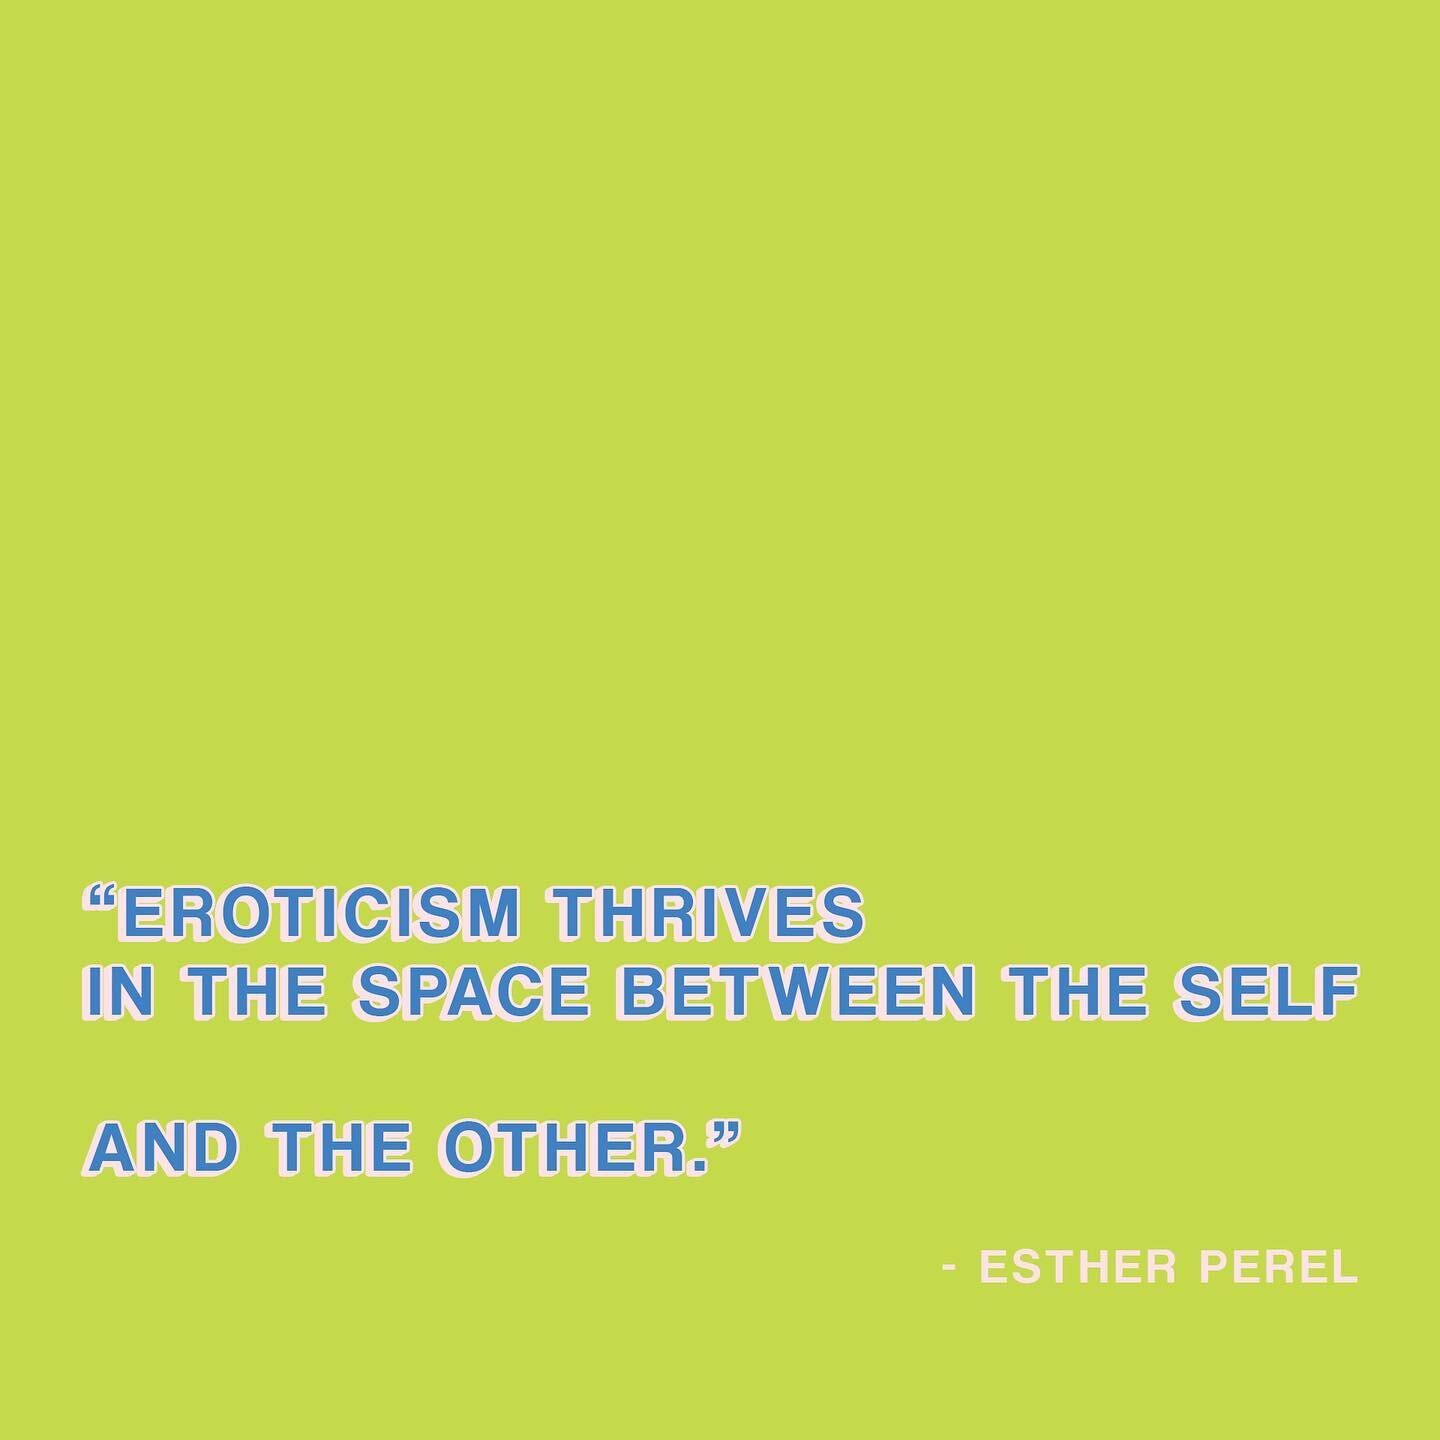 Lots of things can be found in the abstract &lsquo;space&rsquo; in relationships. Shine a flashlight in there every once in a while. 

#estherperel